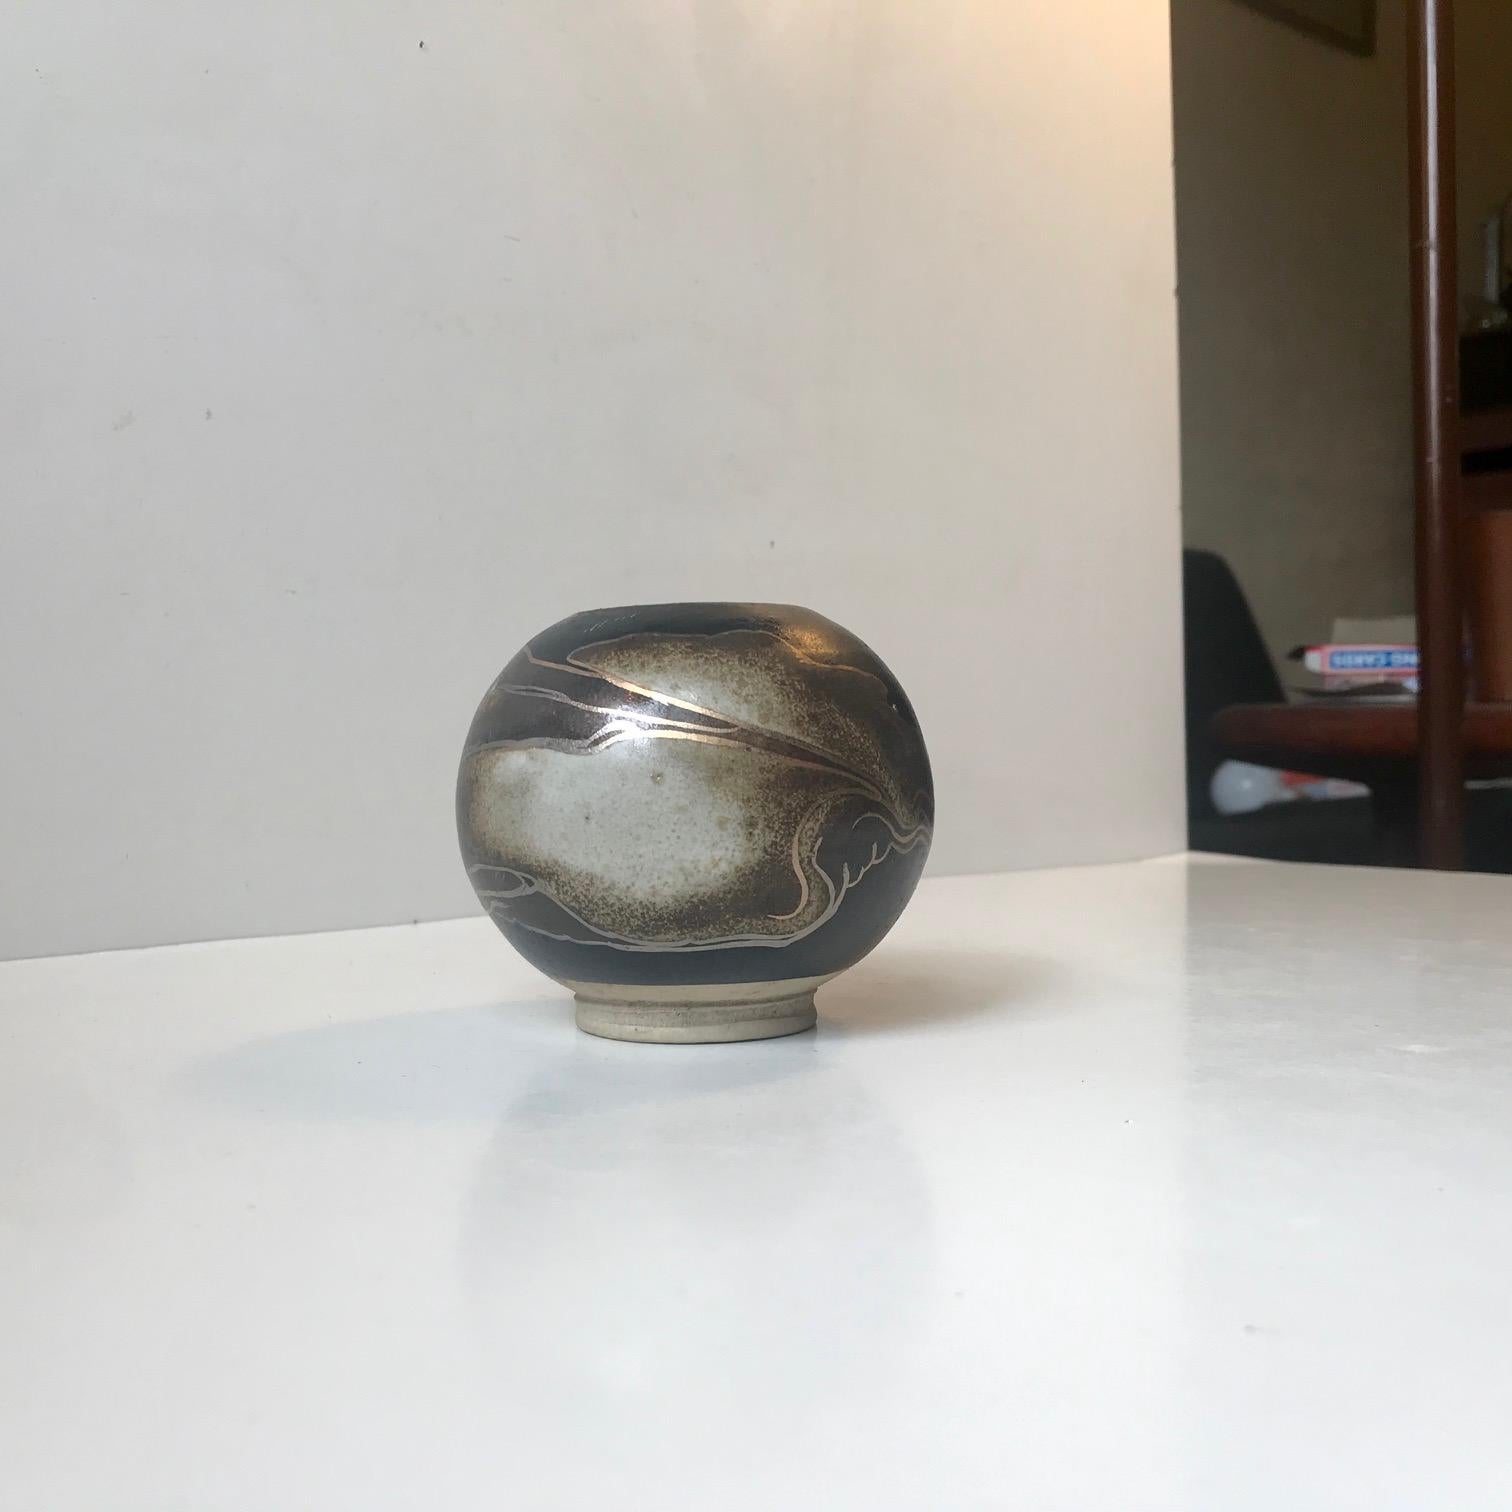 Peter Sylvest has worked at both Royal Copenhagen and Michael Andersen in Denmark and has exhibited all-over the world. This small footed ball vase has a flowing abstract decor in earthy glaze sand is highlighted with gold and silver only. The vase